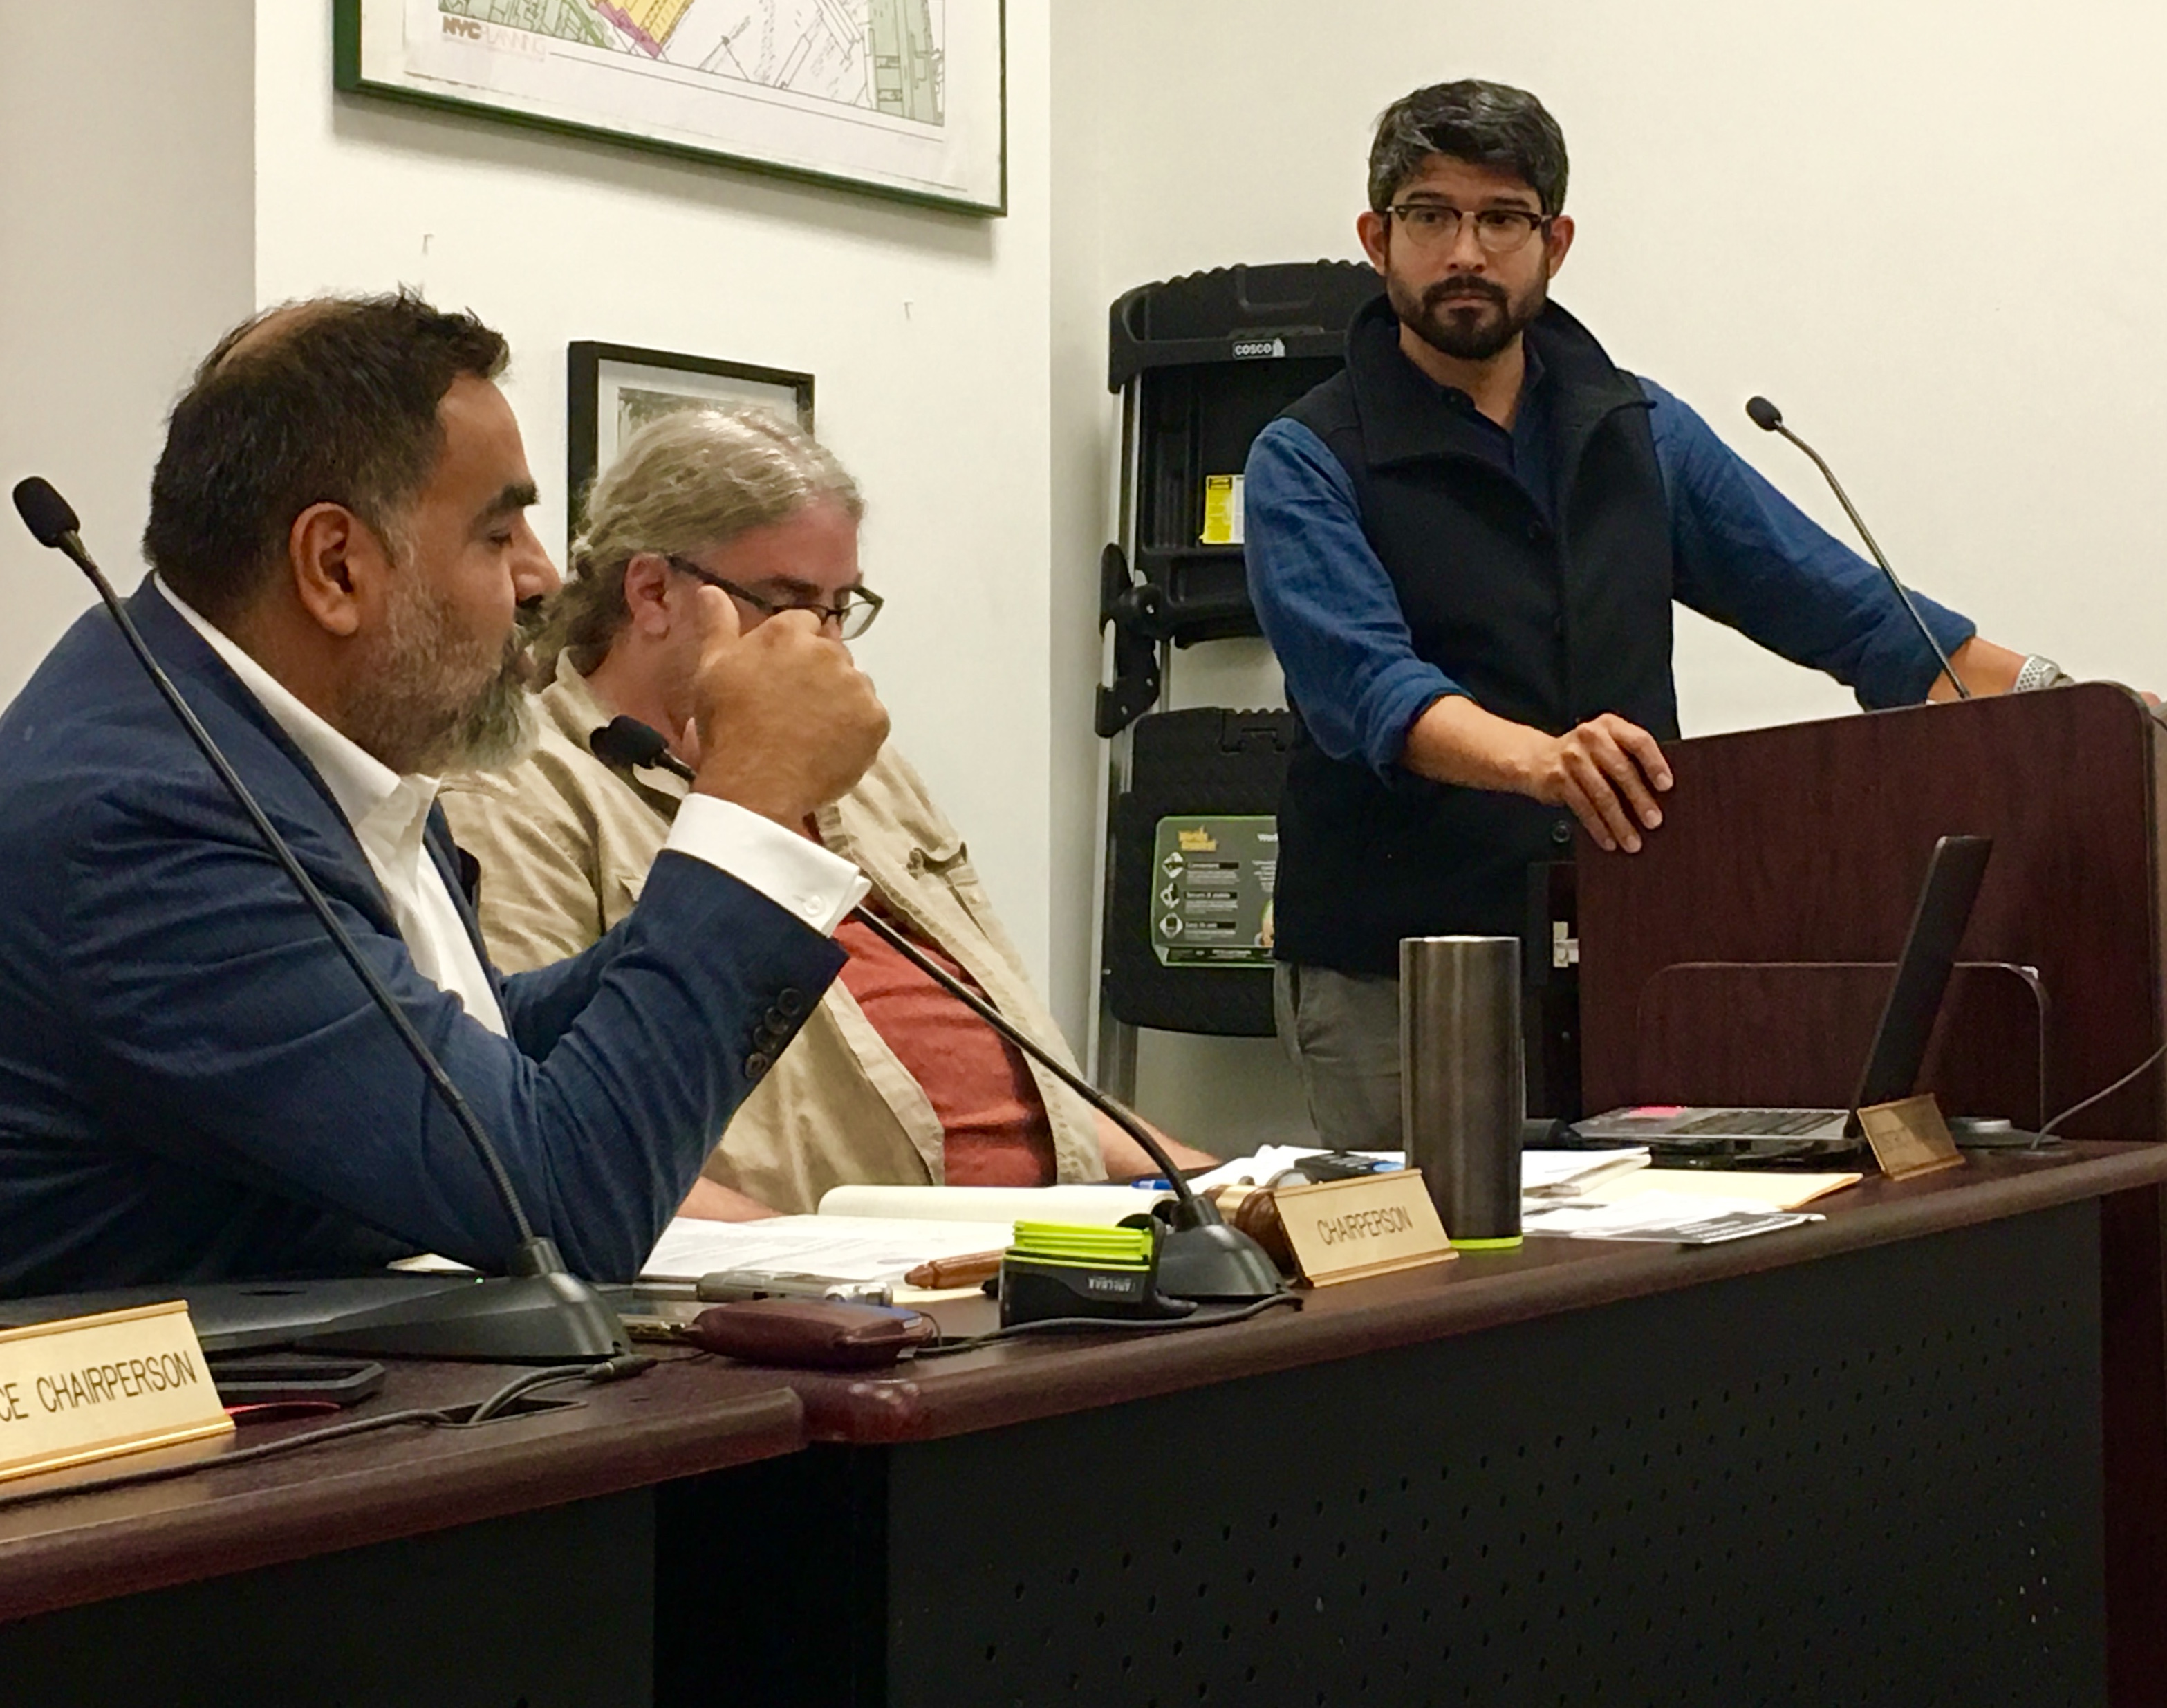 City Councilmember Carlos Menchaca, at the podium, addresses a CB7 meeting. That’s CB7 Chairperson Cesar Zuniga at left. Eagle photo by Lore Croghan